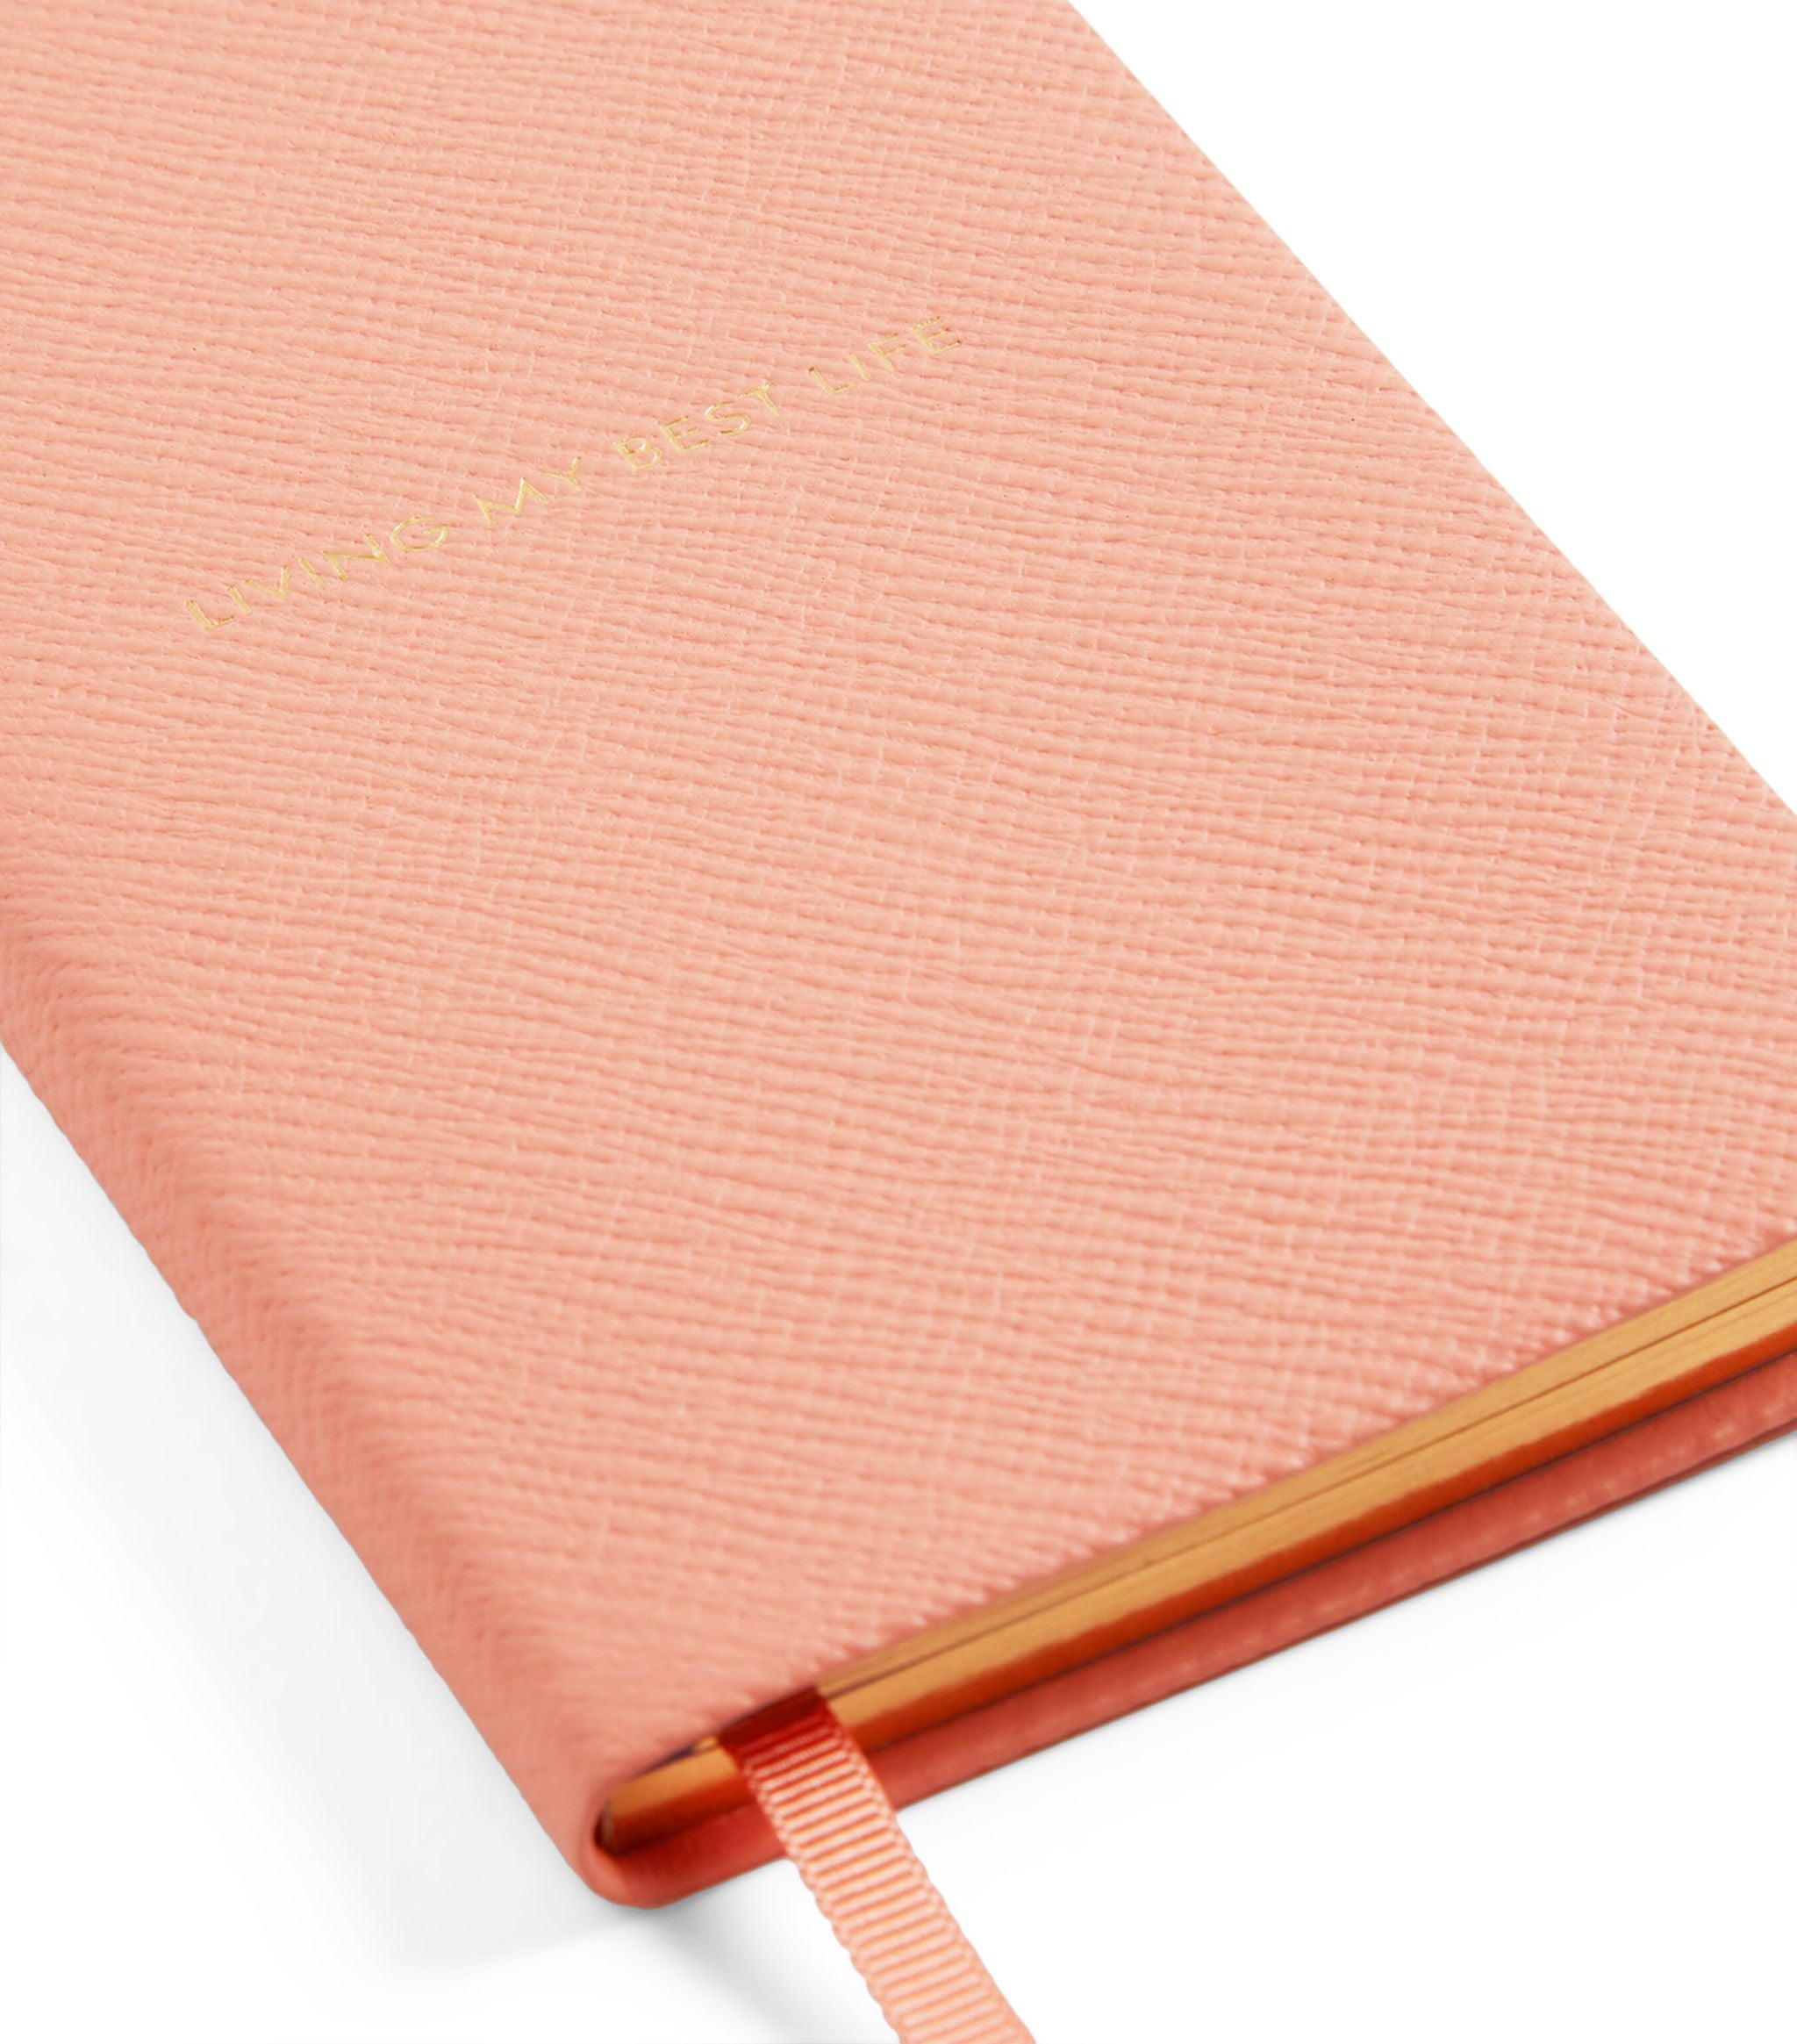 Panama Living My Best Life textured-leather notebook